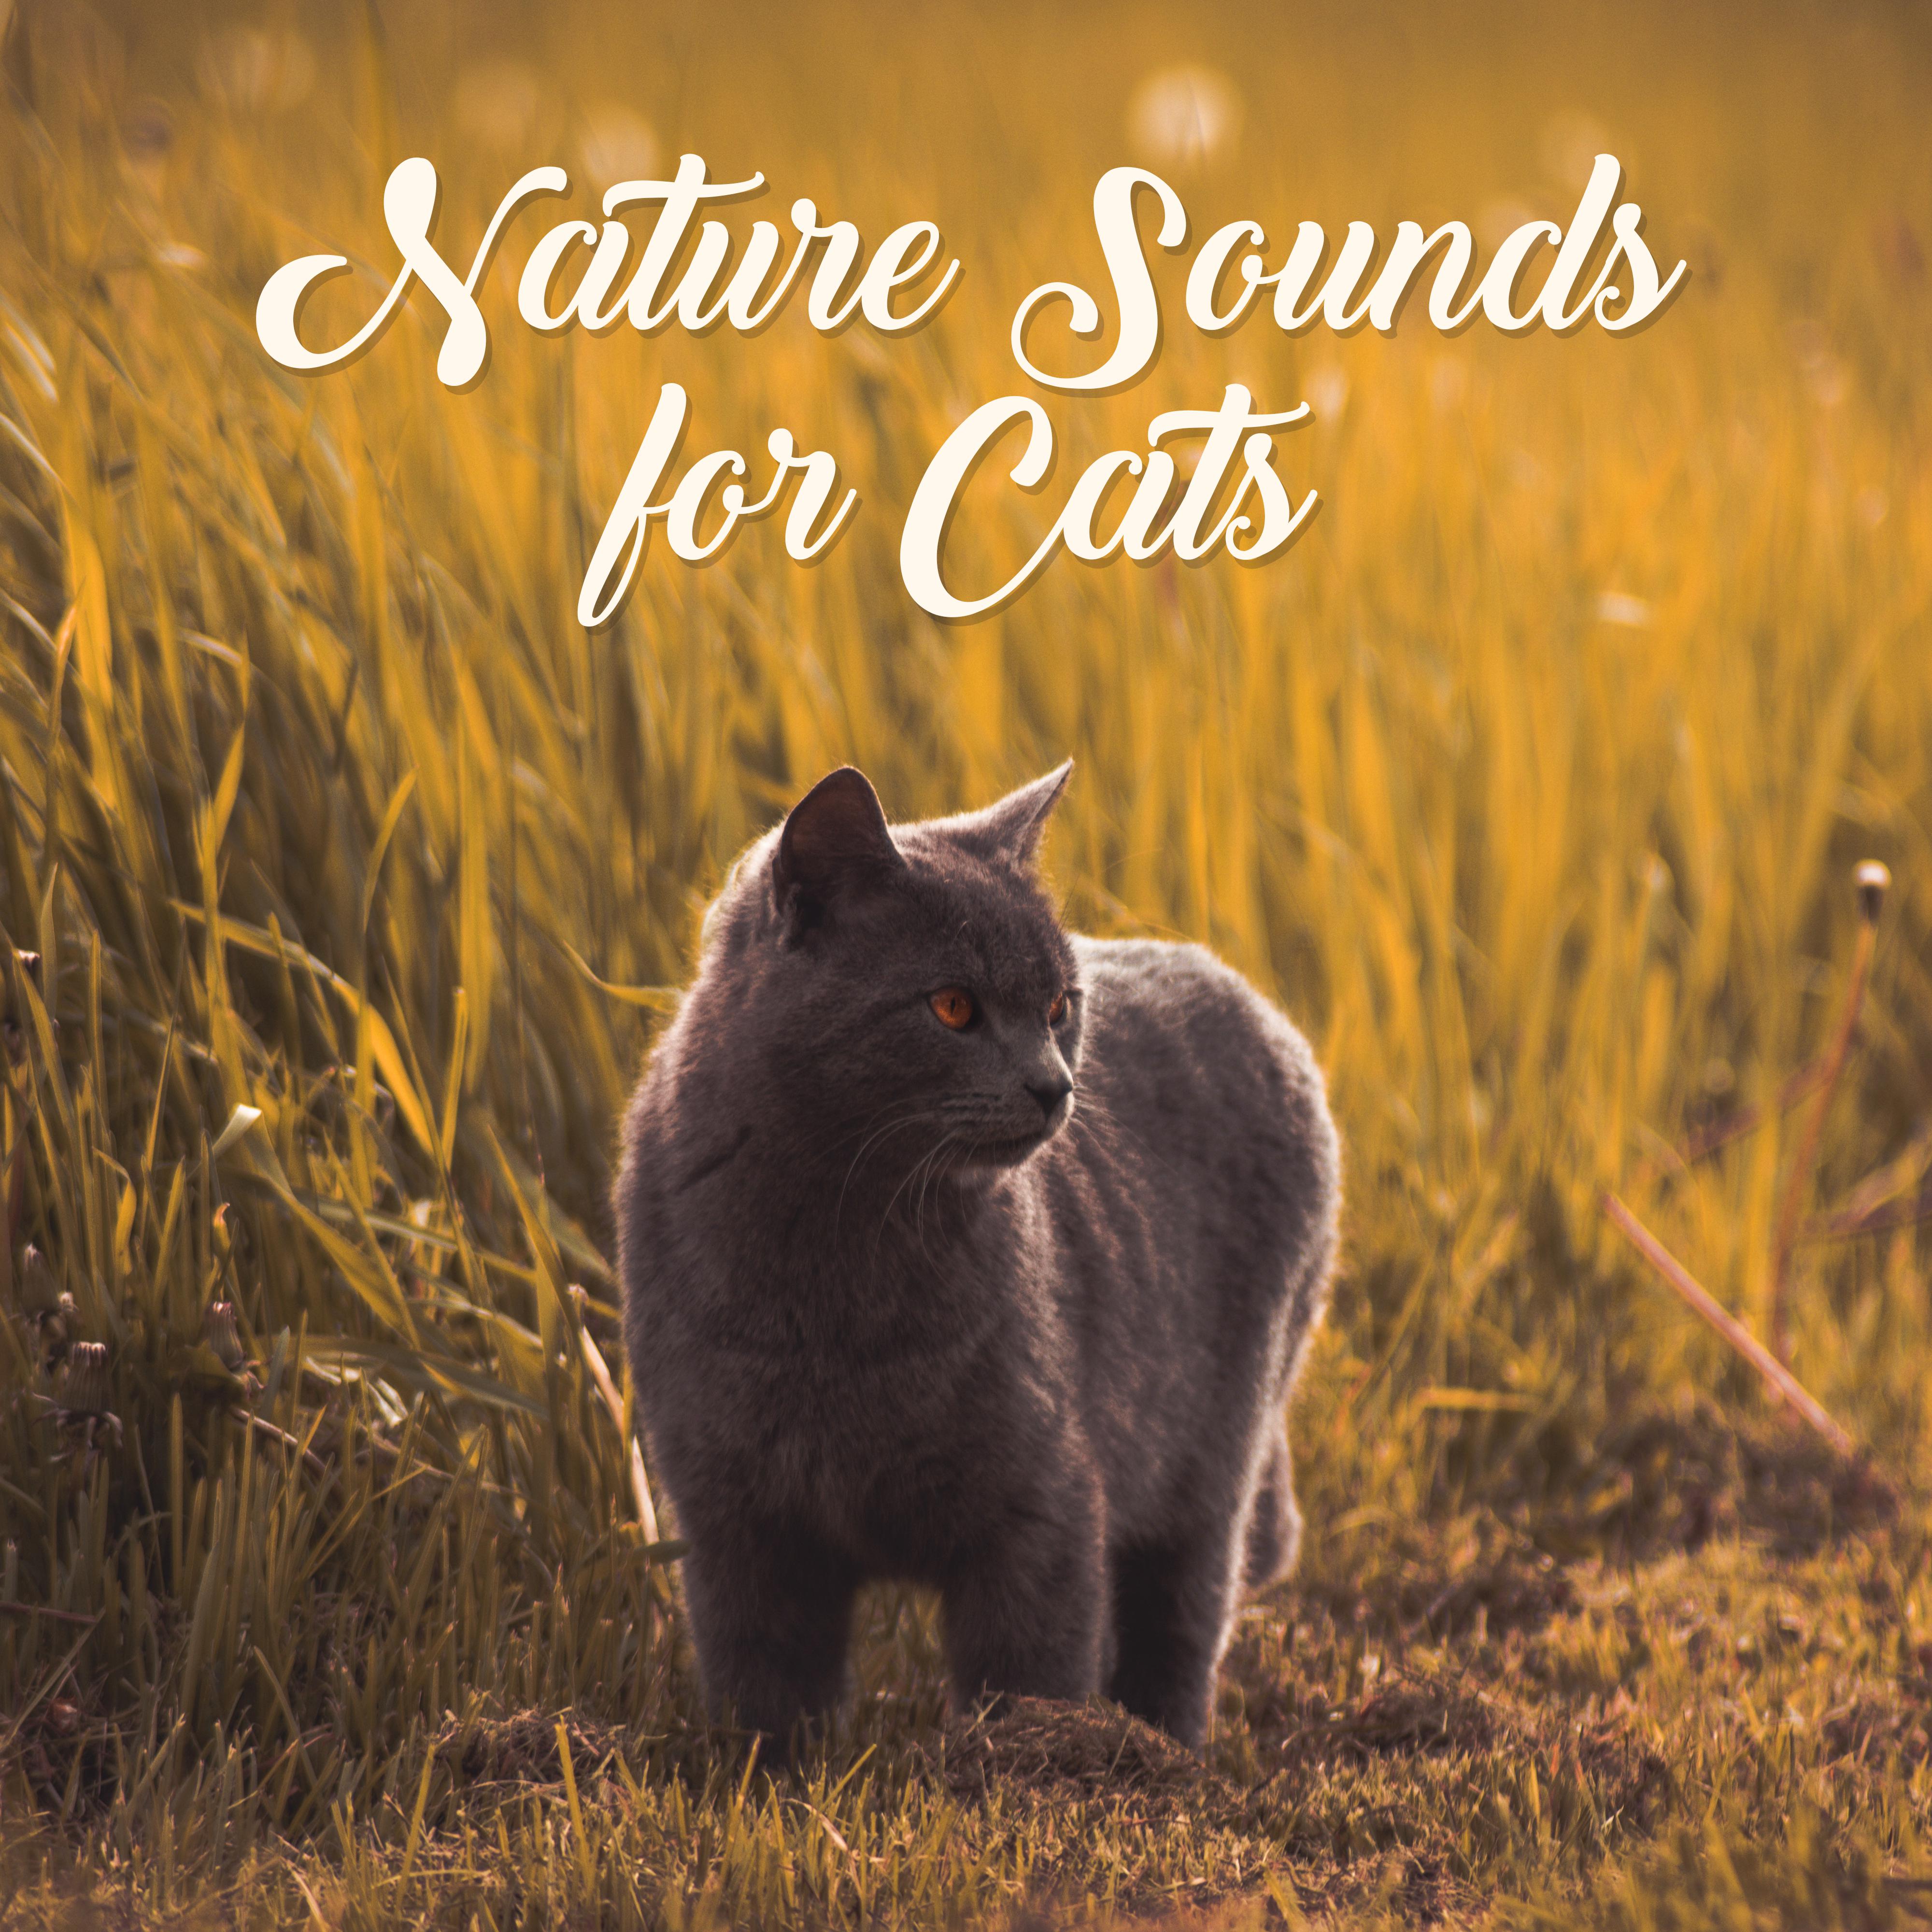 Nature Sounds for Cats: Relaxing Music Therapy, Blissful Songs for Sleep, Relax, Cat Relaxation, Music Reduces Stress, Bird Sounds